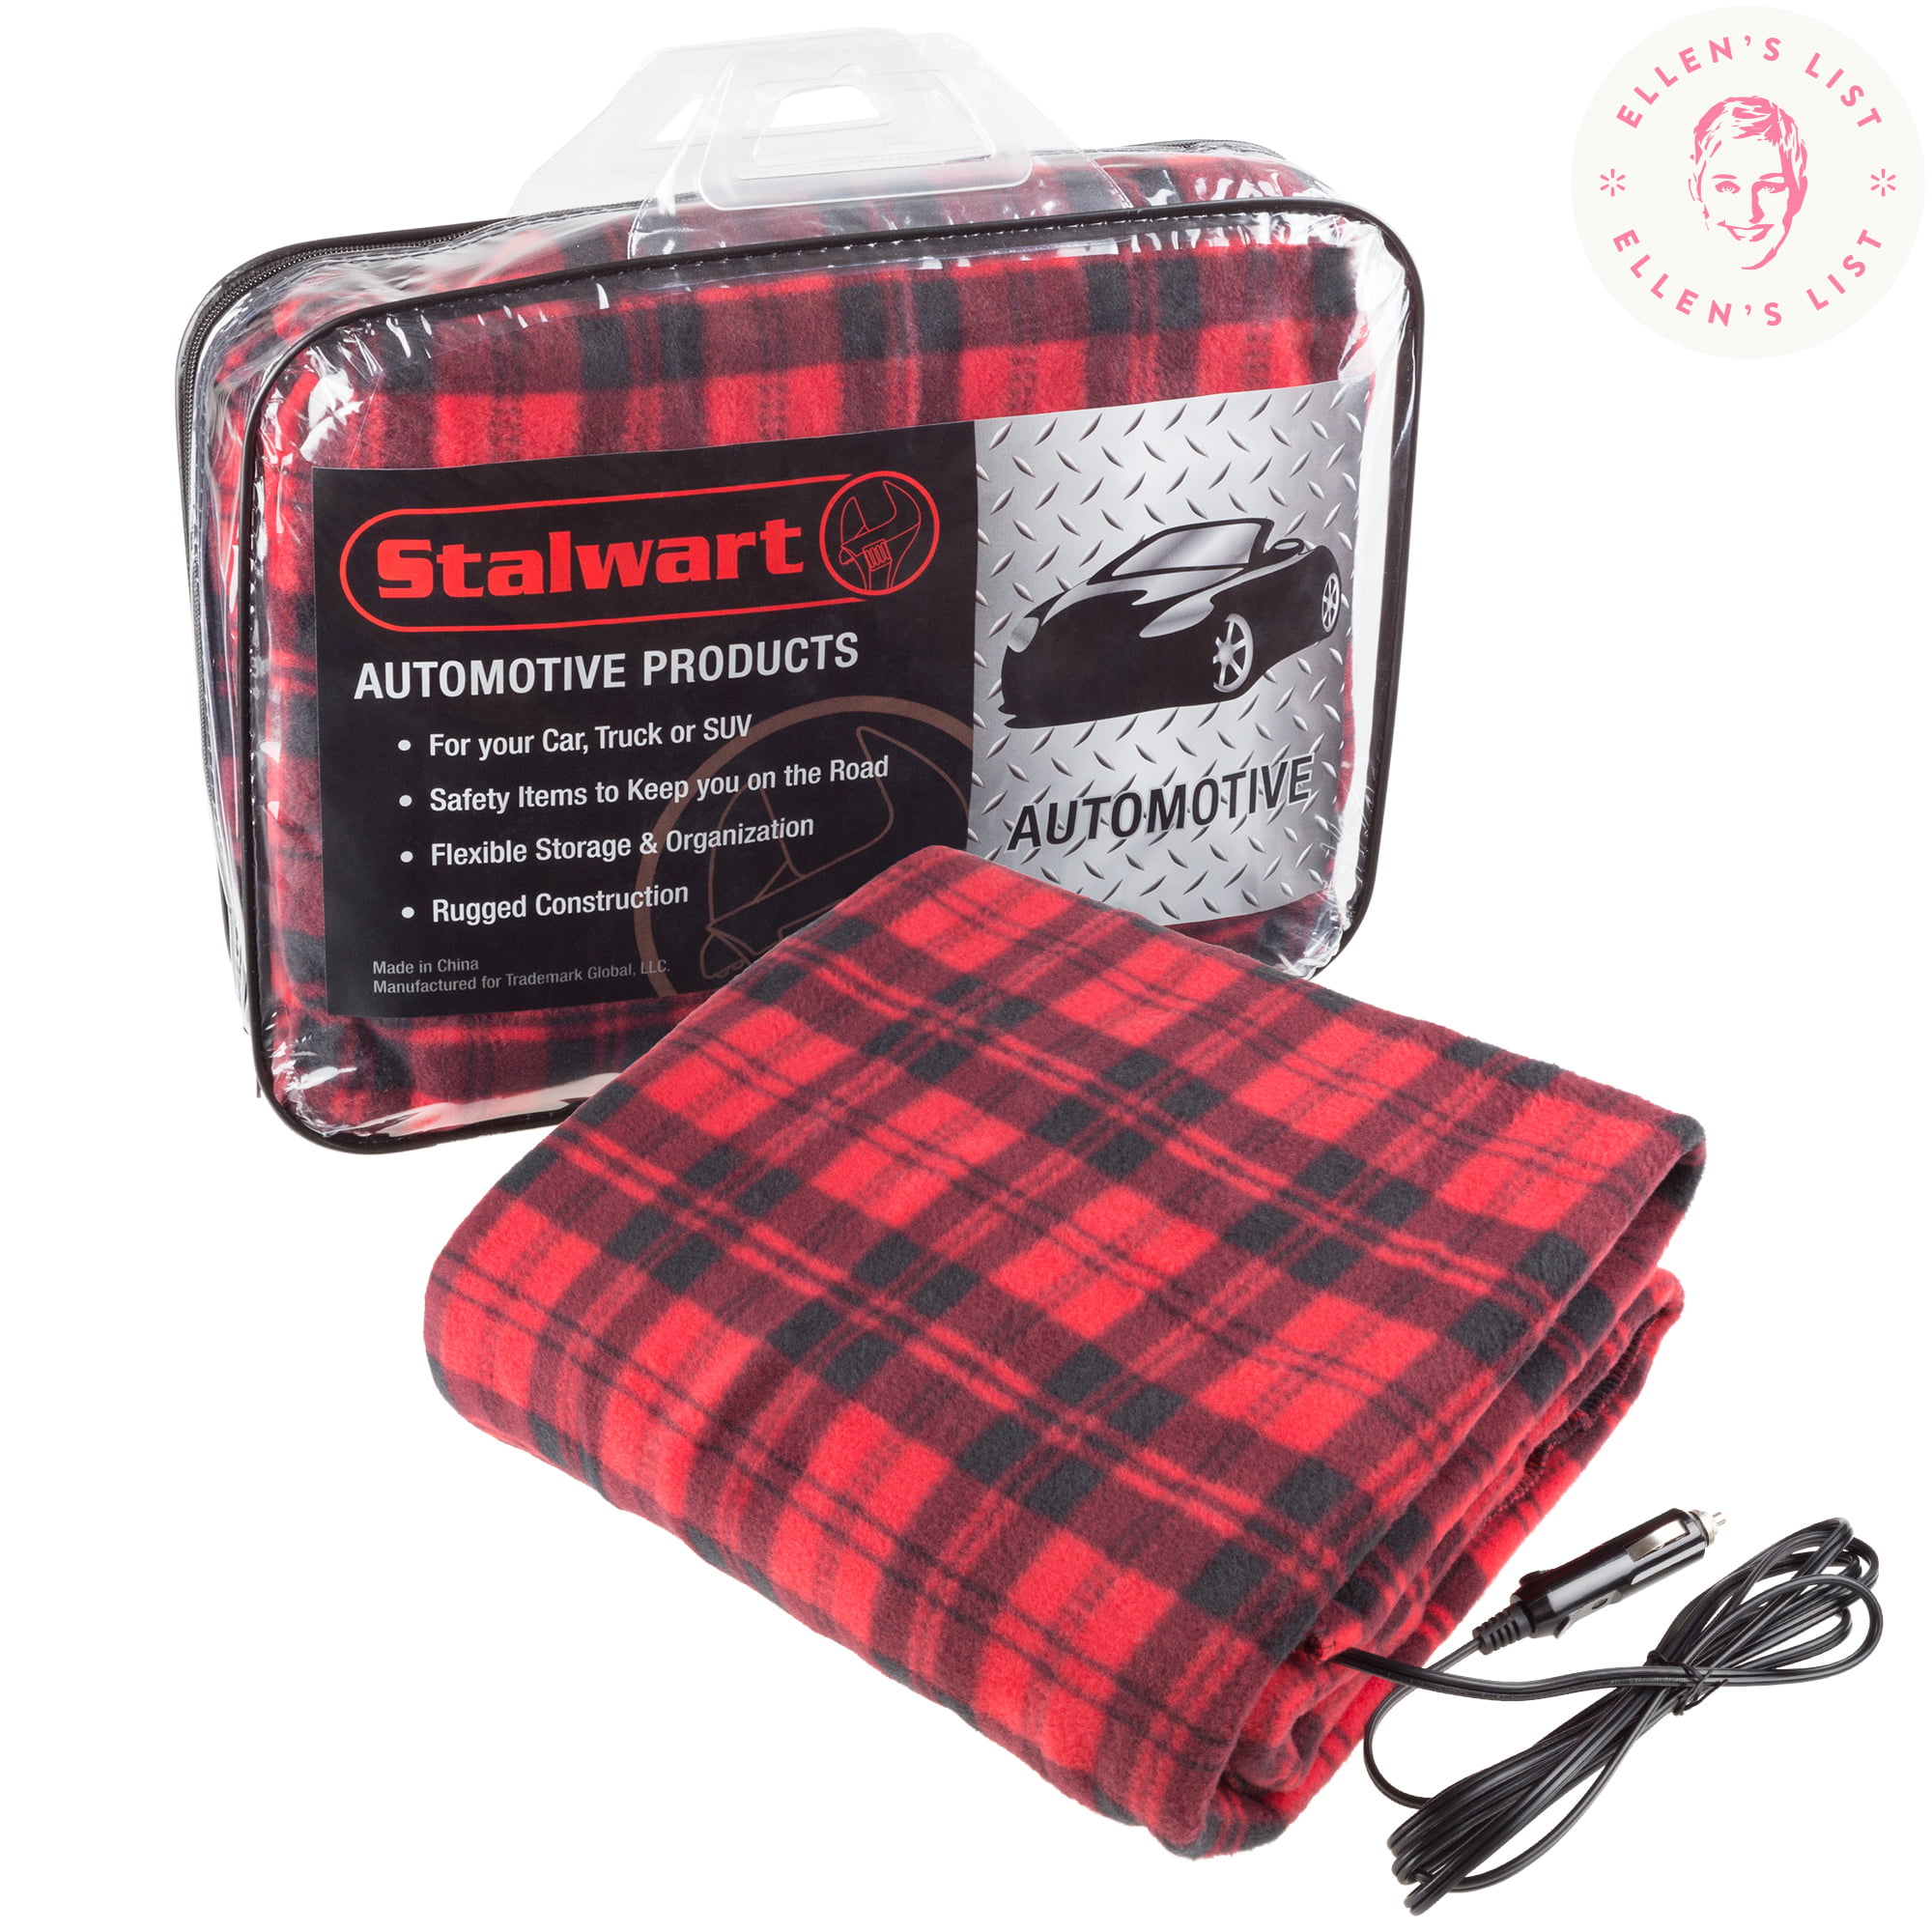 heated car blanket bed bath and beyond